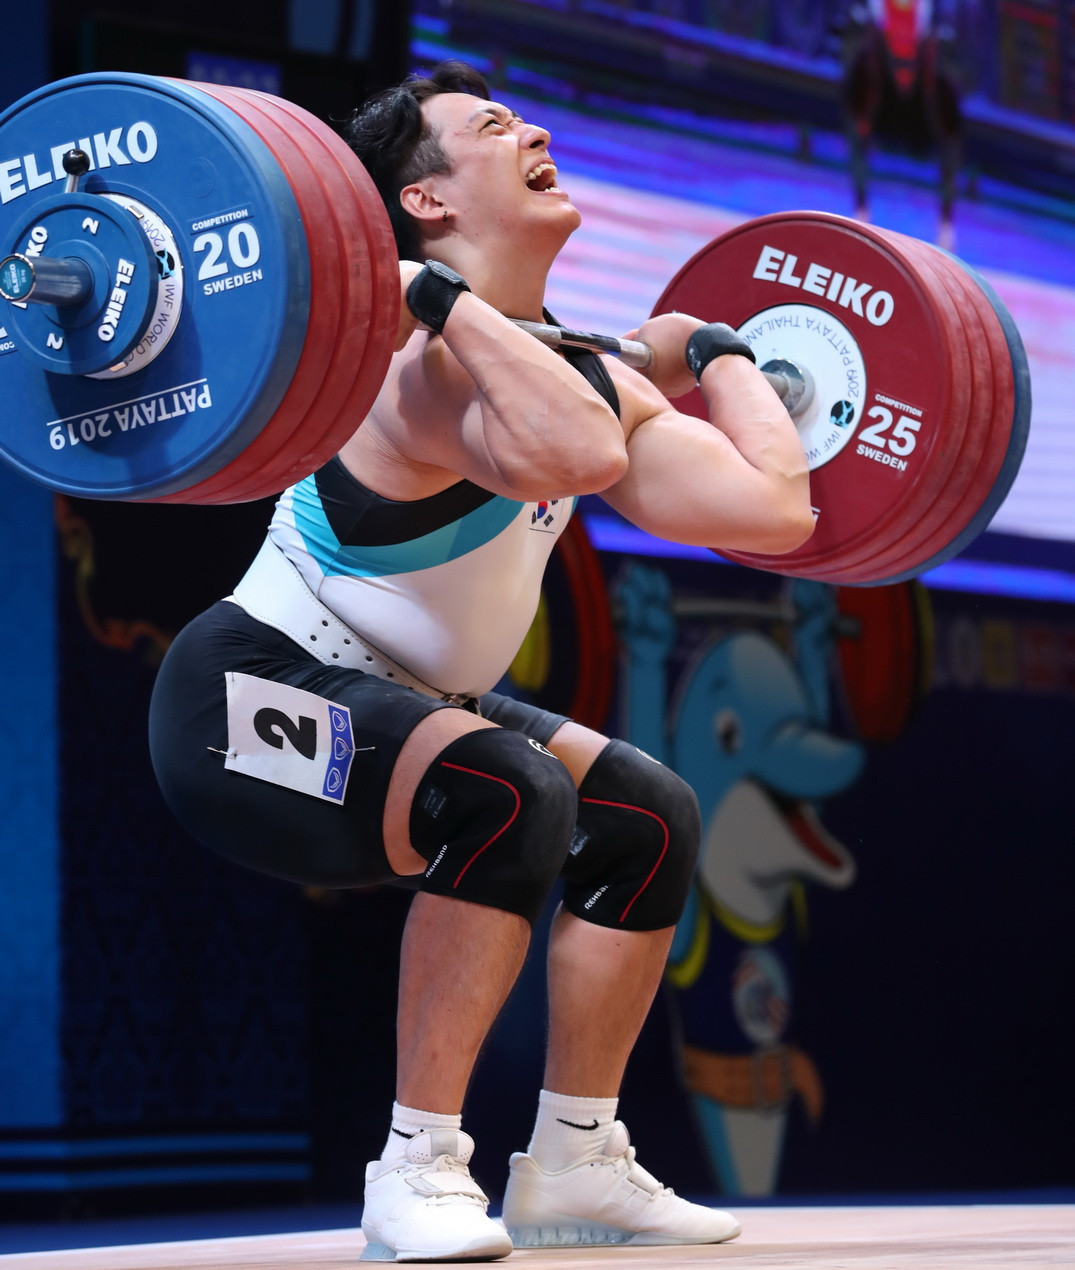 The overall silver medallist was South Korea’s Jin Yunseong ©IWF